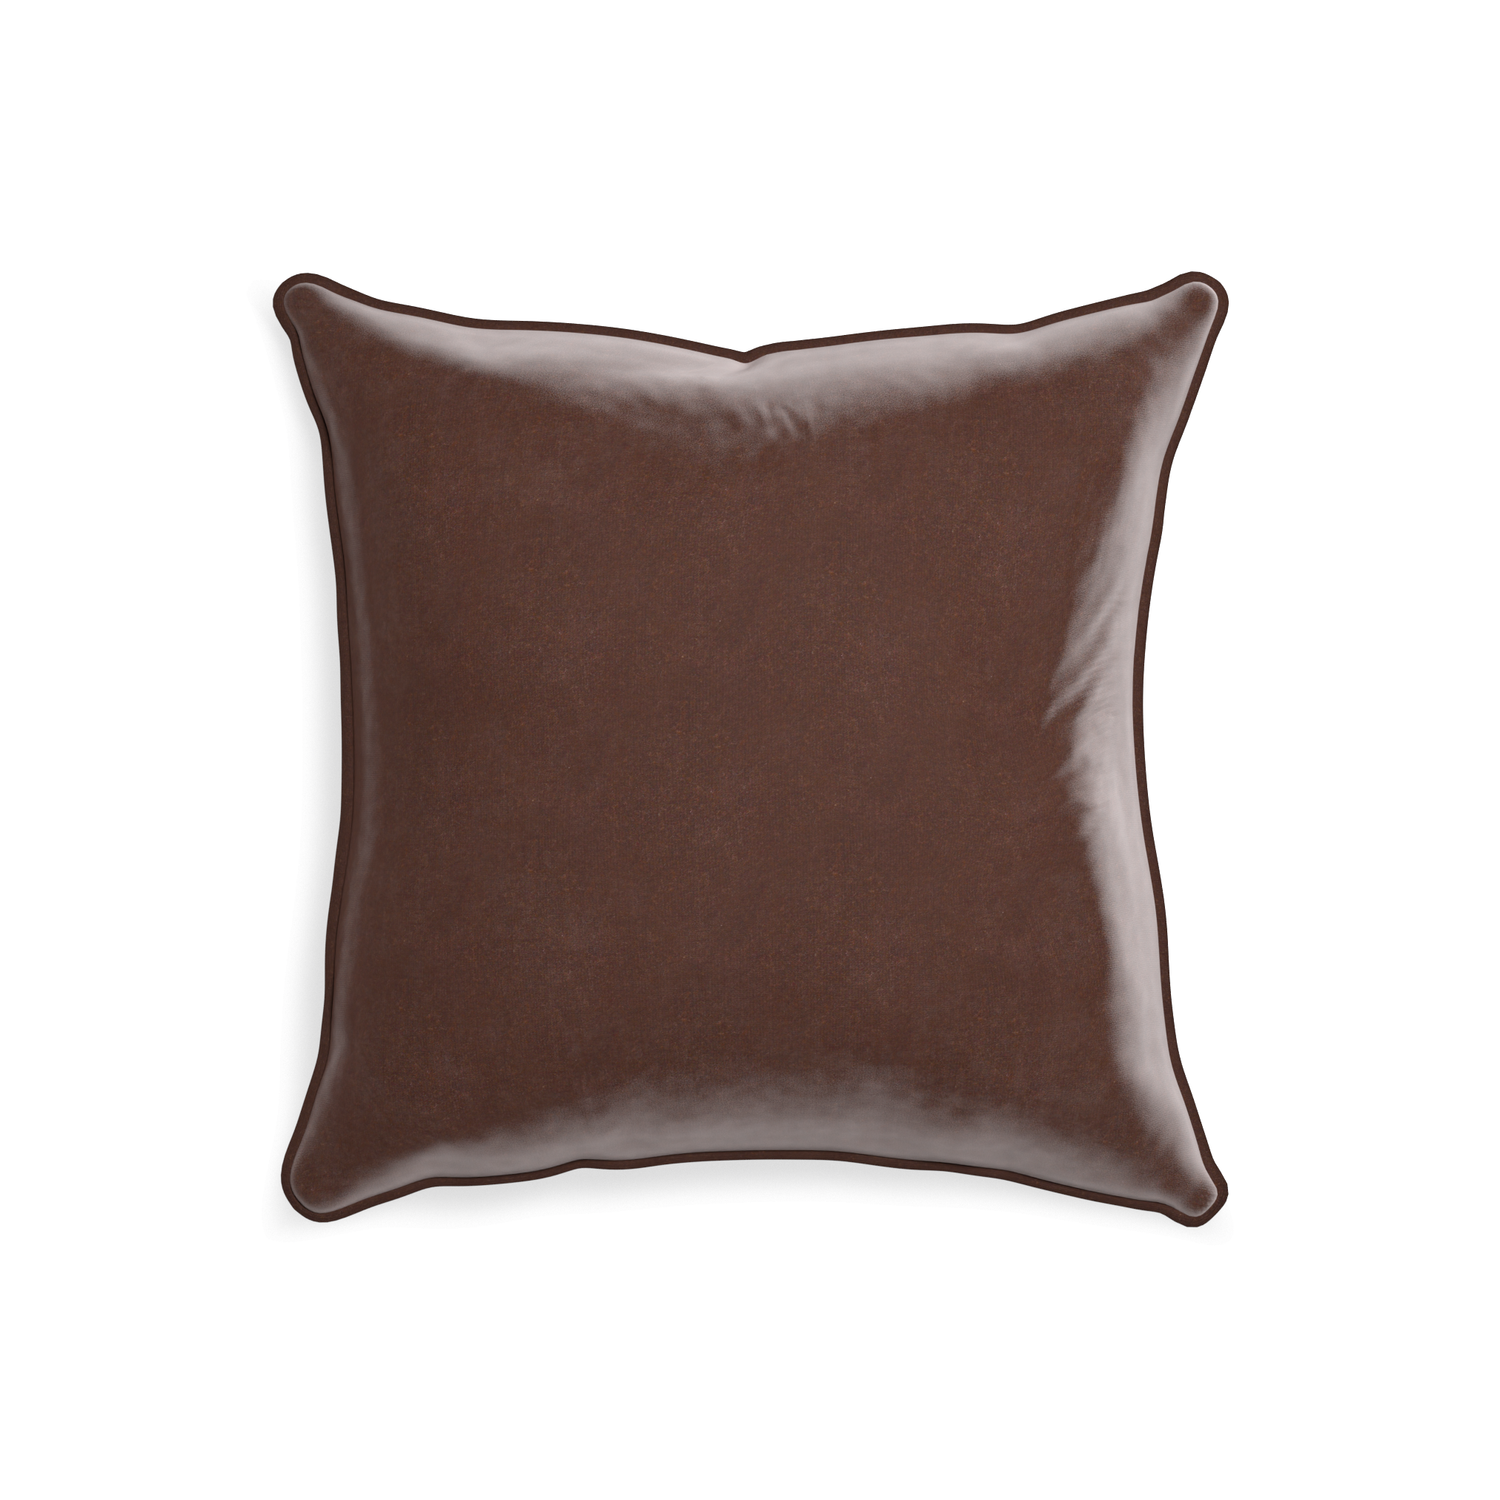 20-square walnut velvet custom pillow with w piping on white background